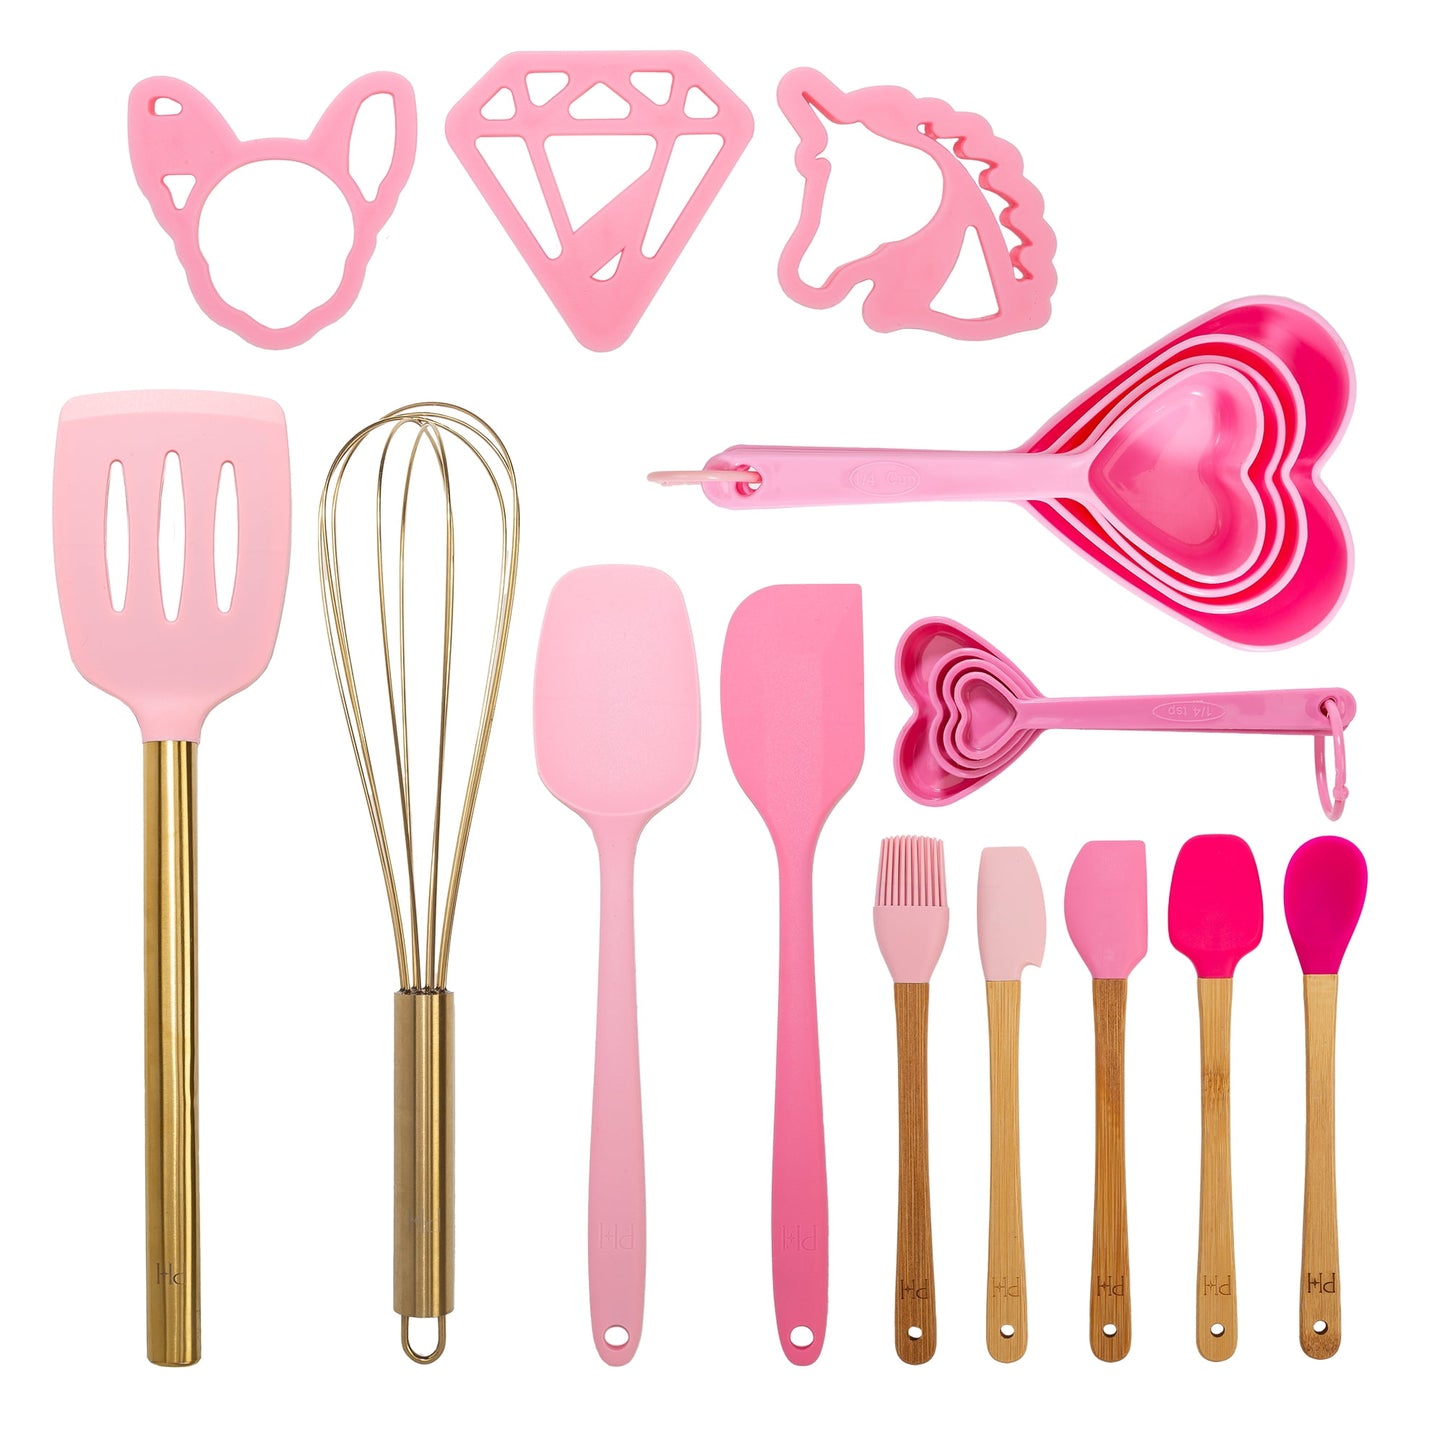 Paris Hilton 20 Piece Kitchen Gadget Set, Complete Baking Tool Set with Measuring Cups, Cookie Cutters, and Silicone Tools, Heat-Resistant up to 400°F - Dishwasher Safe, Pink